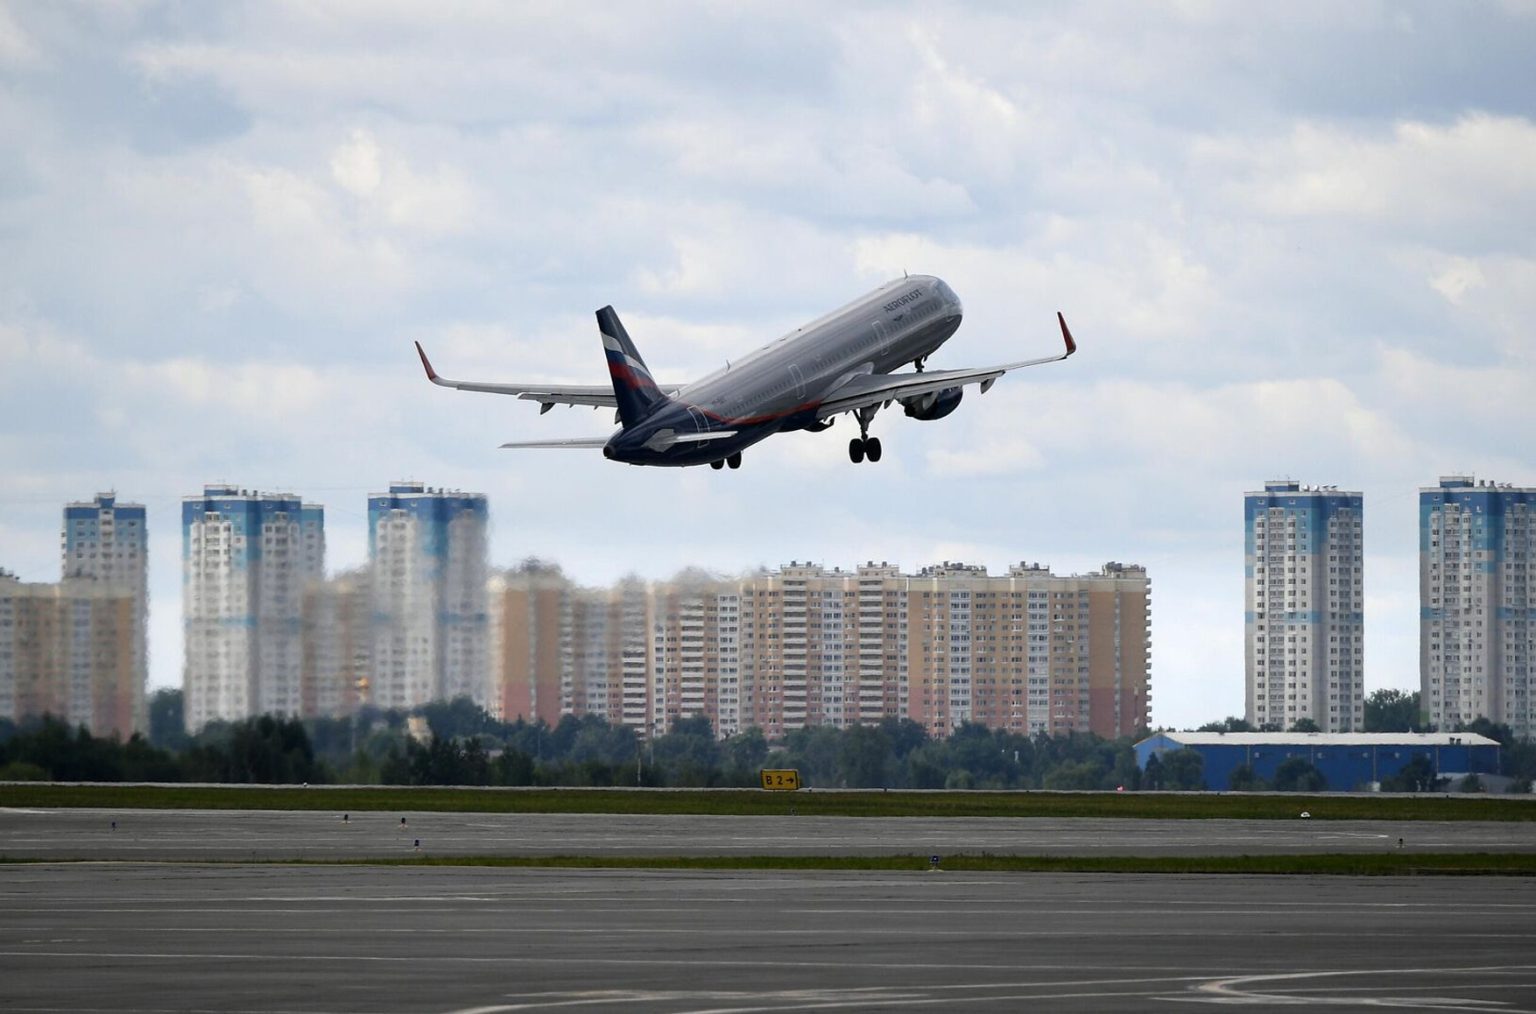 Aeroflot And Other Carriers Are Asking To Be Allowed To Increase Aircraft Maintenance Intervals Due To Sanctions